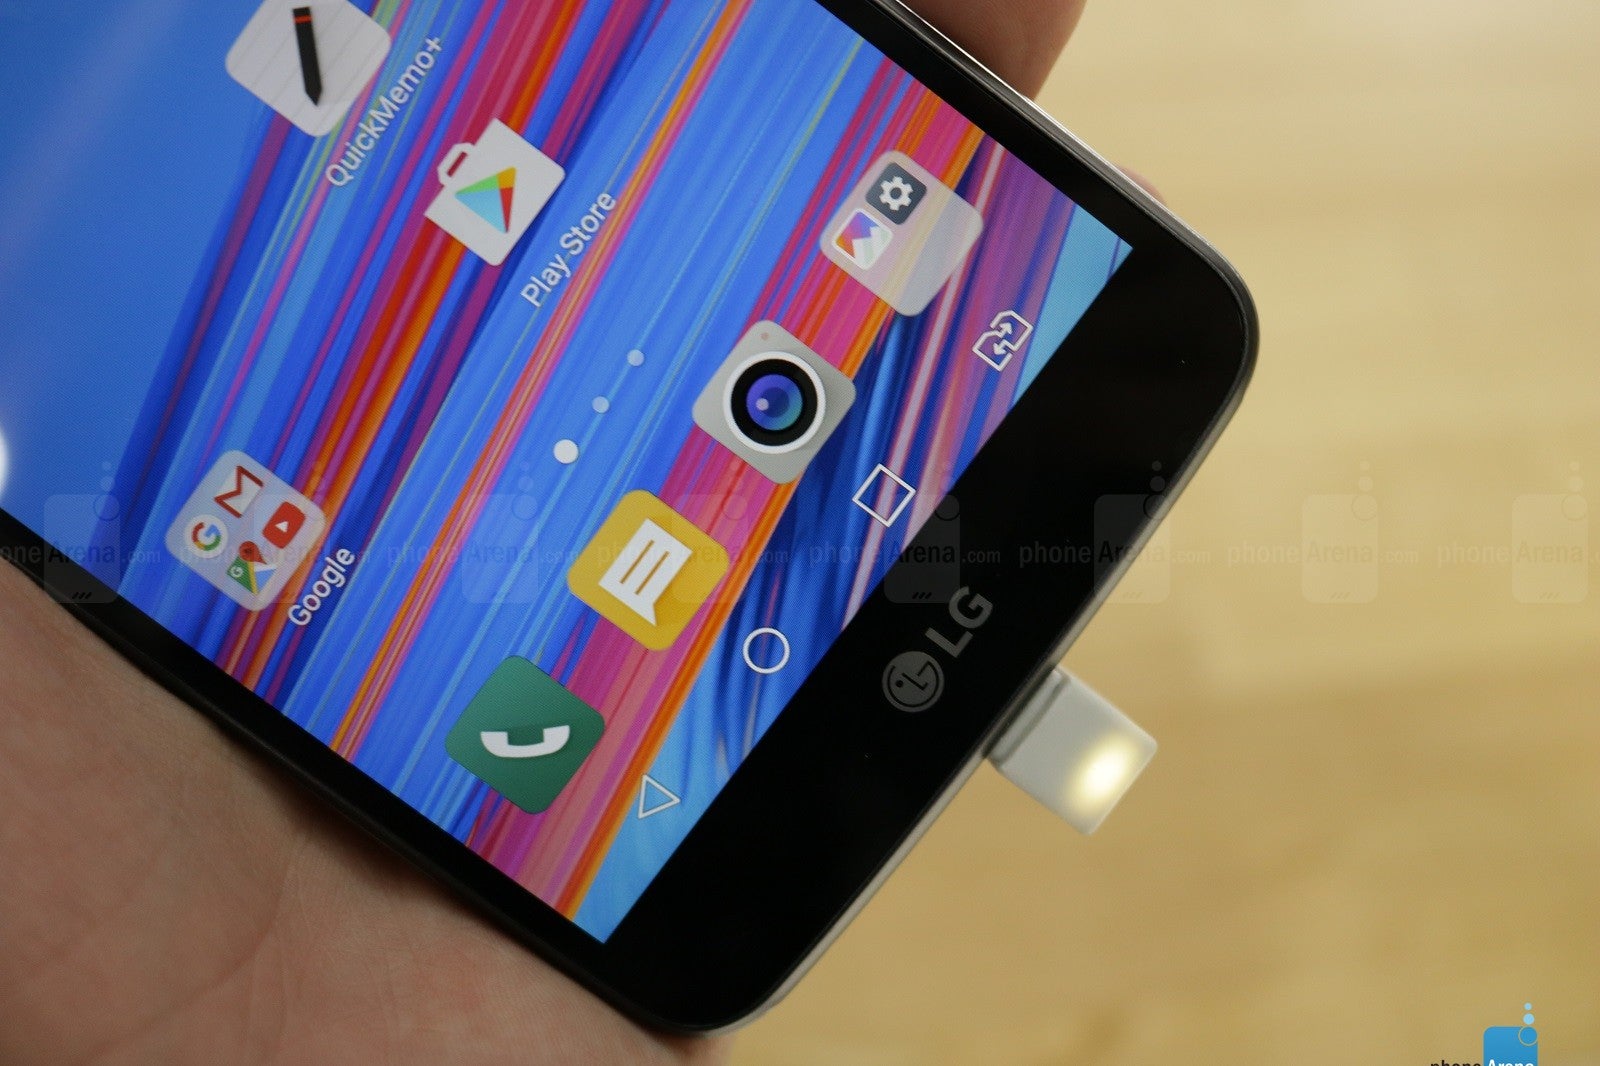 Going hands on with the LG Stylus 3 - a phone with a lot of the Note's features for a lot less money